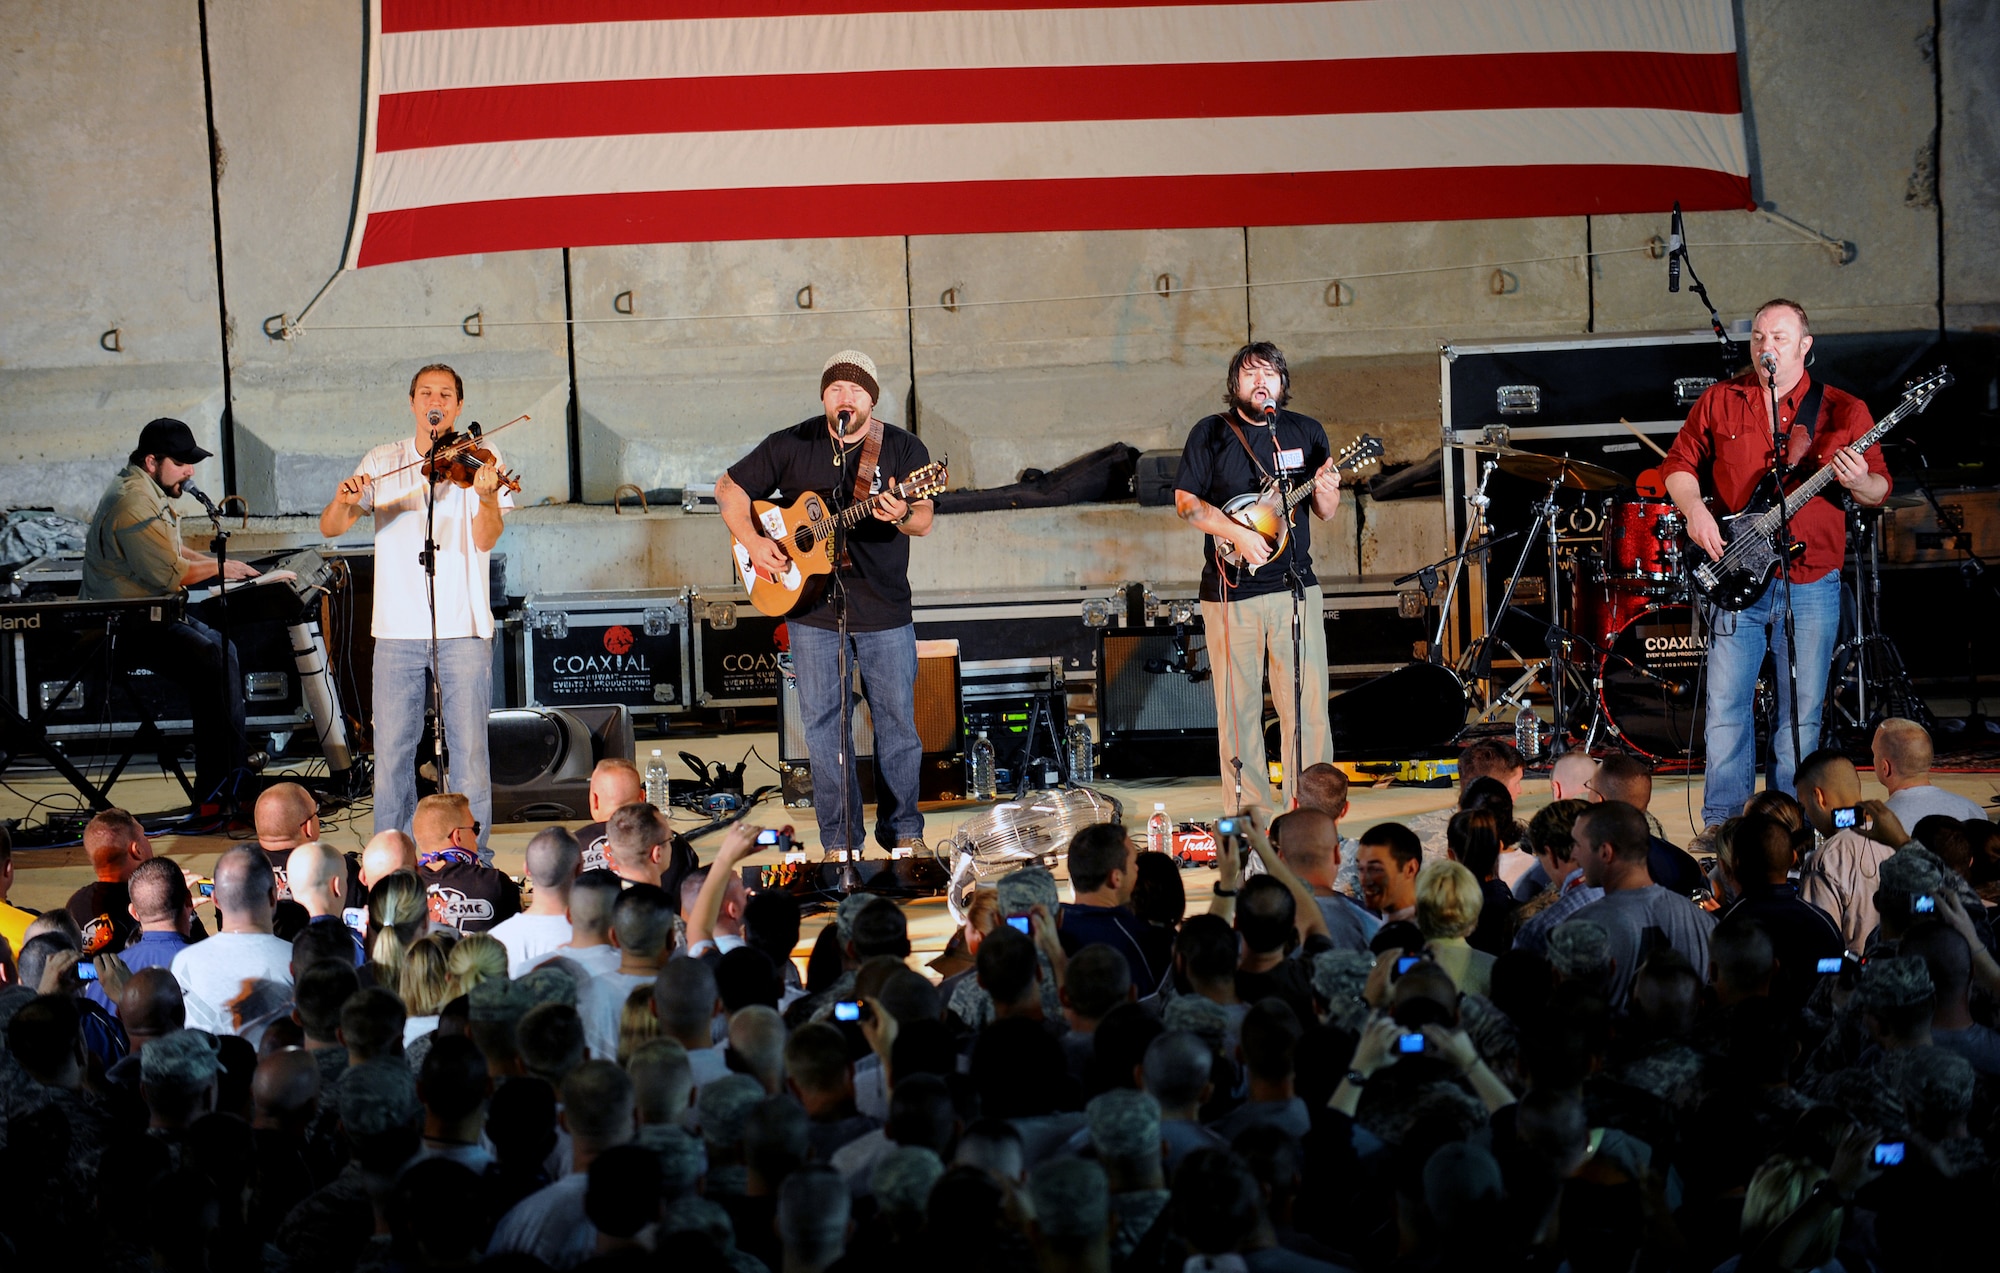 Members of the Zac Brown Band perform for a crowd of deployed personnel at Holt Stadium at Joint Base Balad, Iraq, April 18, 2010. The Grammy-nominated band is touring various bases throughout Southwest Asia to perform for the troops rather than attend this year's Academy of Country Music Awards for which they were nominated for several awards. (U.S. Air Force photo by Master Sgt. Linda C. Miller/Released)